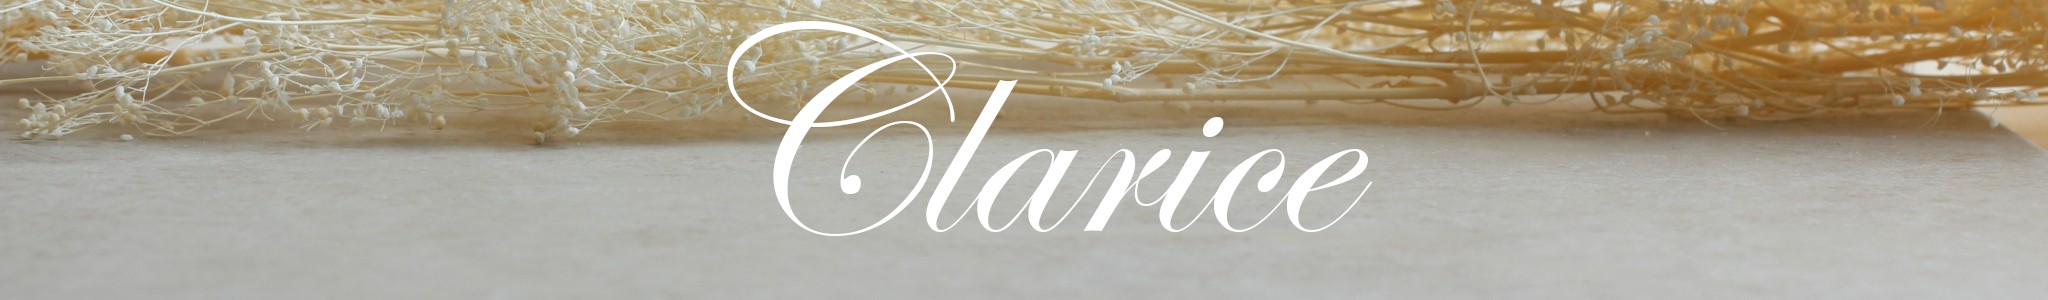 Clarice Product Line Image